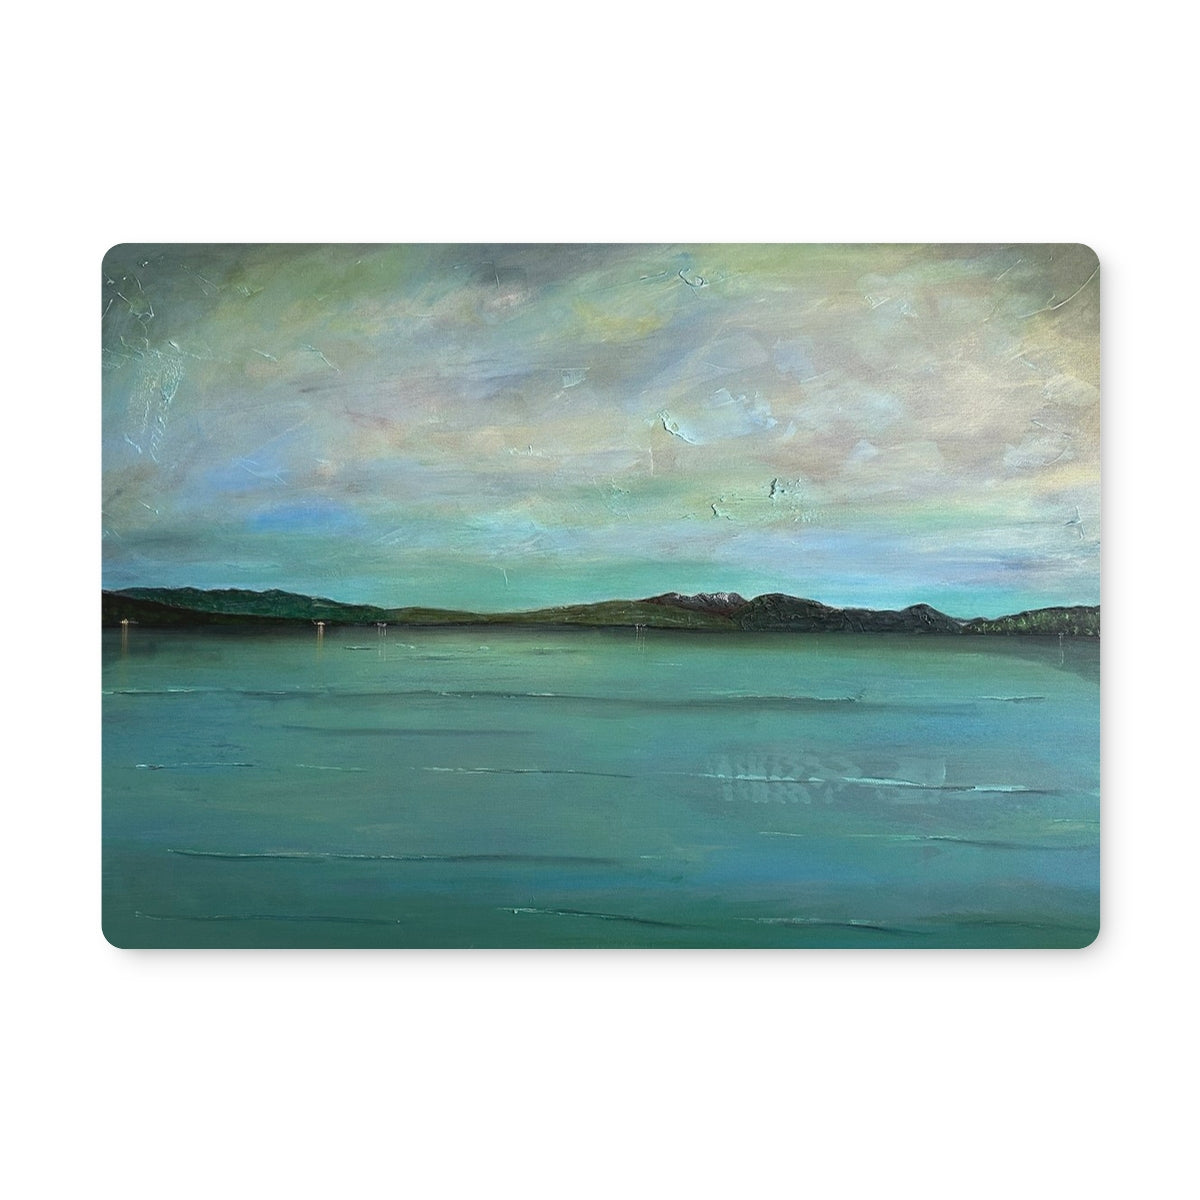 An Ethereal Loch Lomond Art Gifts Placemat-Placemats-Scottish Lochs & Mountains Art Gallery-2 Placemats-Paintings, Prints, Homeware, Art Gifts From Scotland By Scottish Artist Kevin Hunter